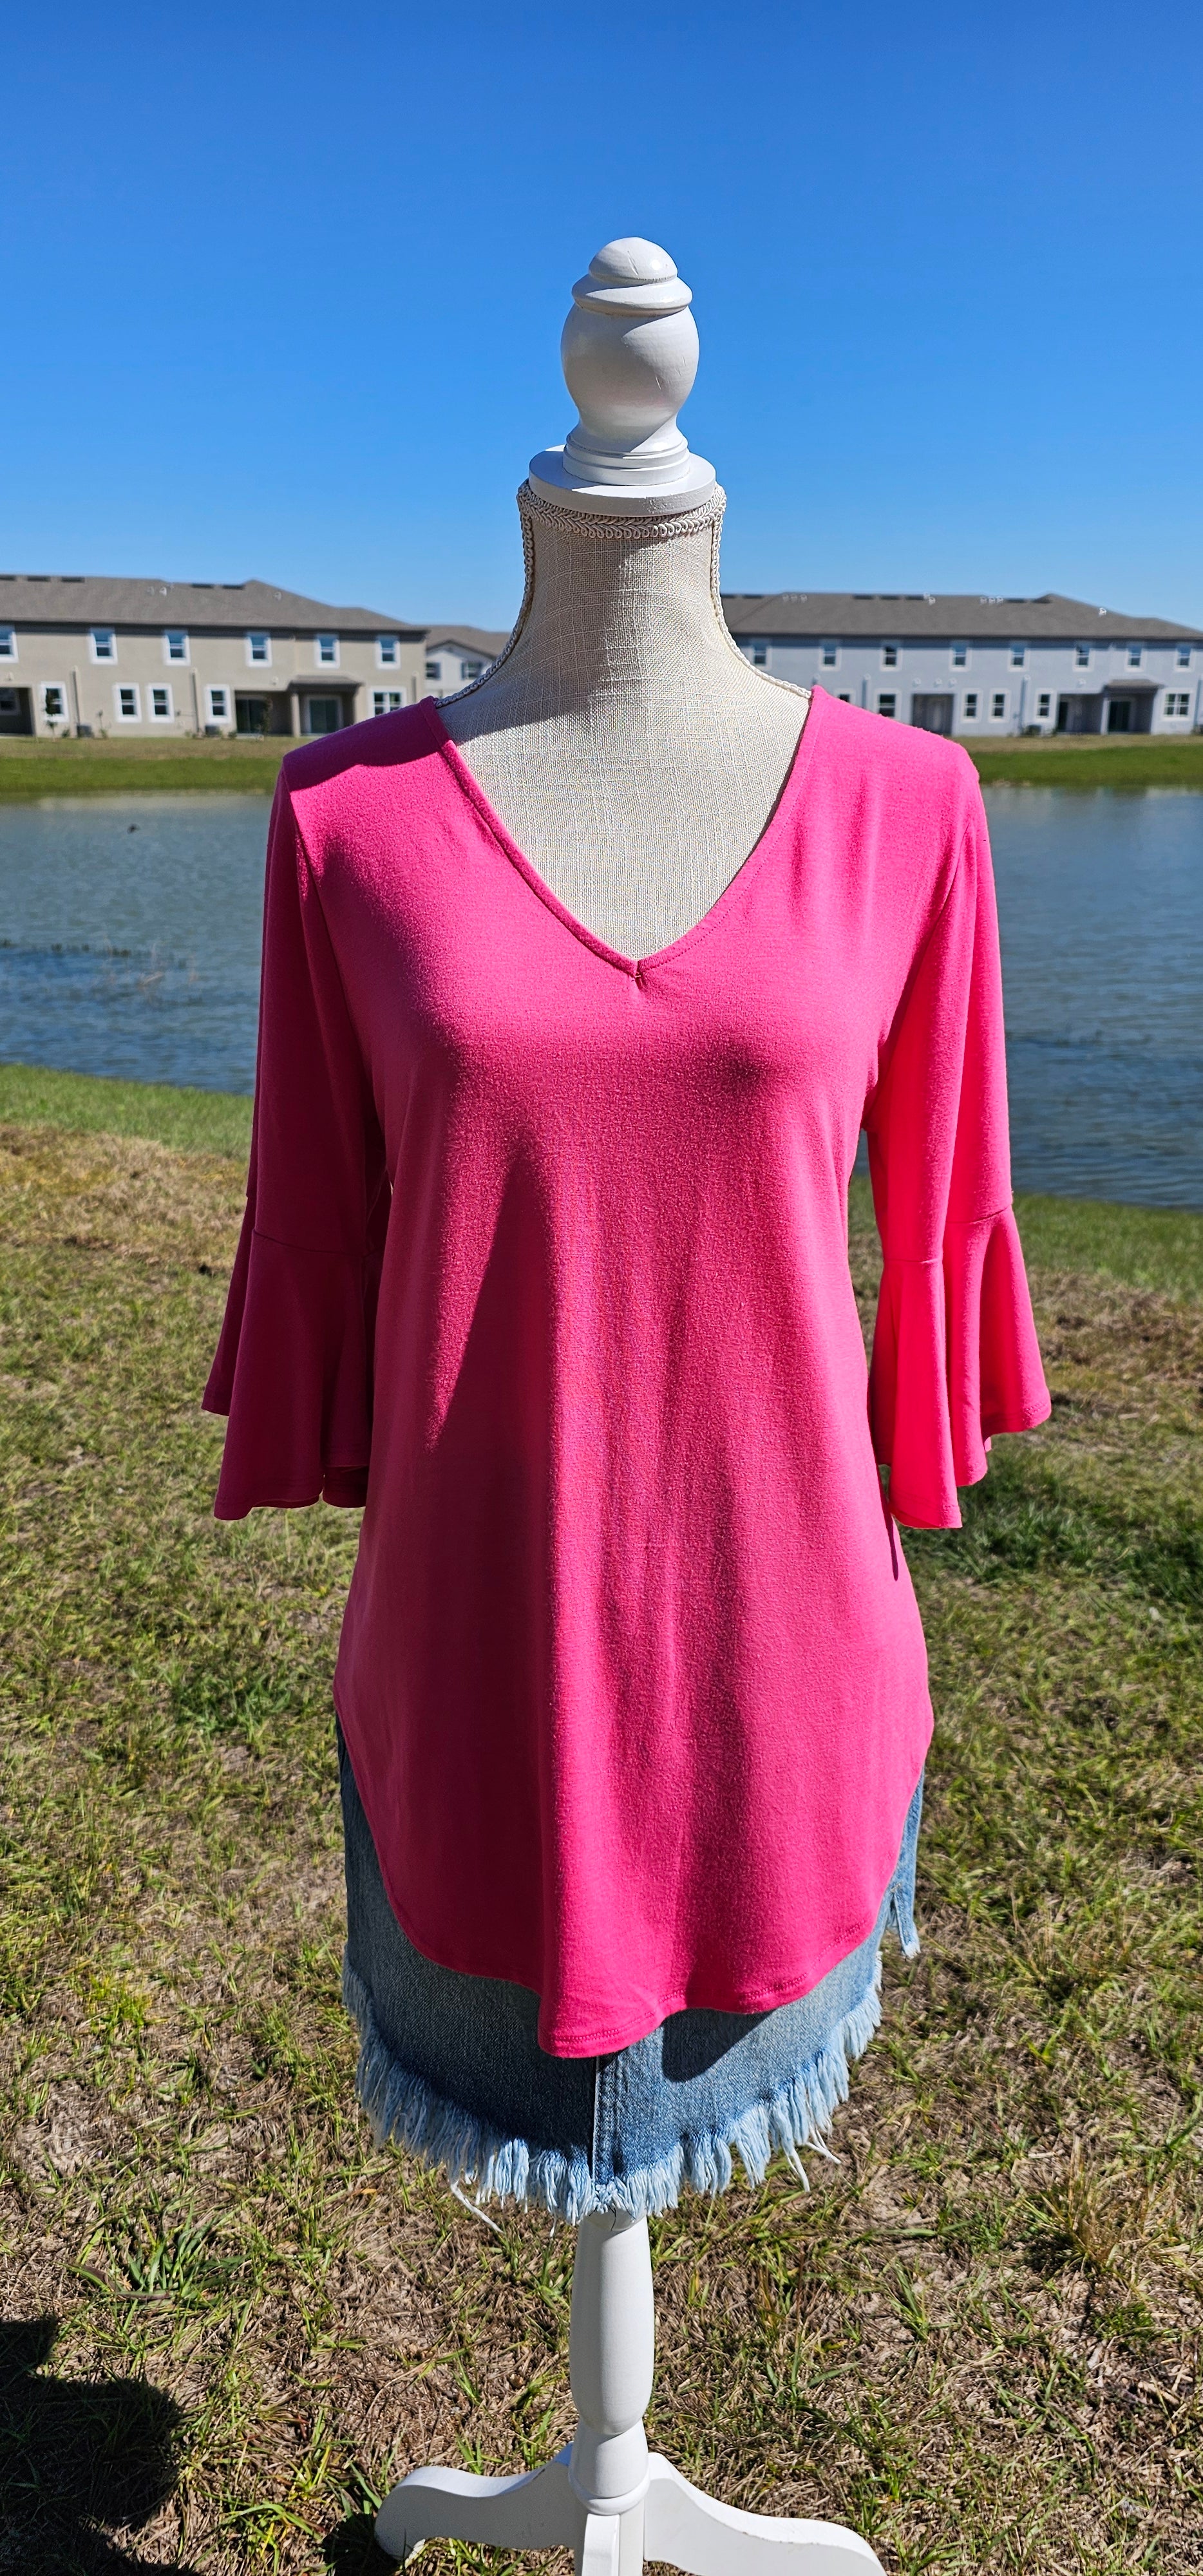 This is a comfy and casual top! This is a ruffled bell sleeve, rounded hem, v-neck shirt. Color is fuchsia. Easy to dress up or down. Pair with your favorite pair of denim jeans, shorts, skirt, or dress pants. Don’t be afraid to get creative! Sizes small through x-large.